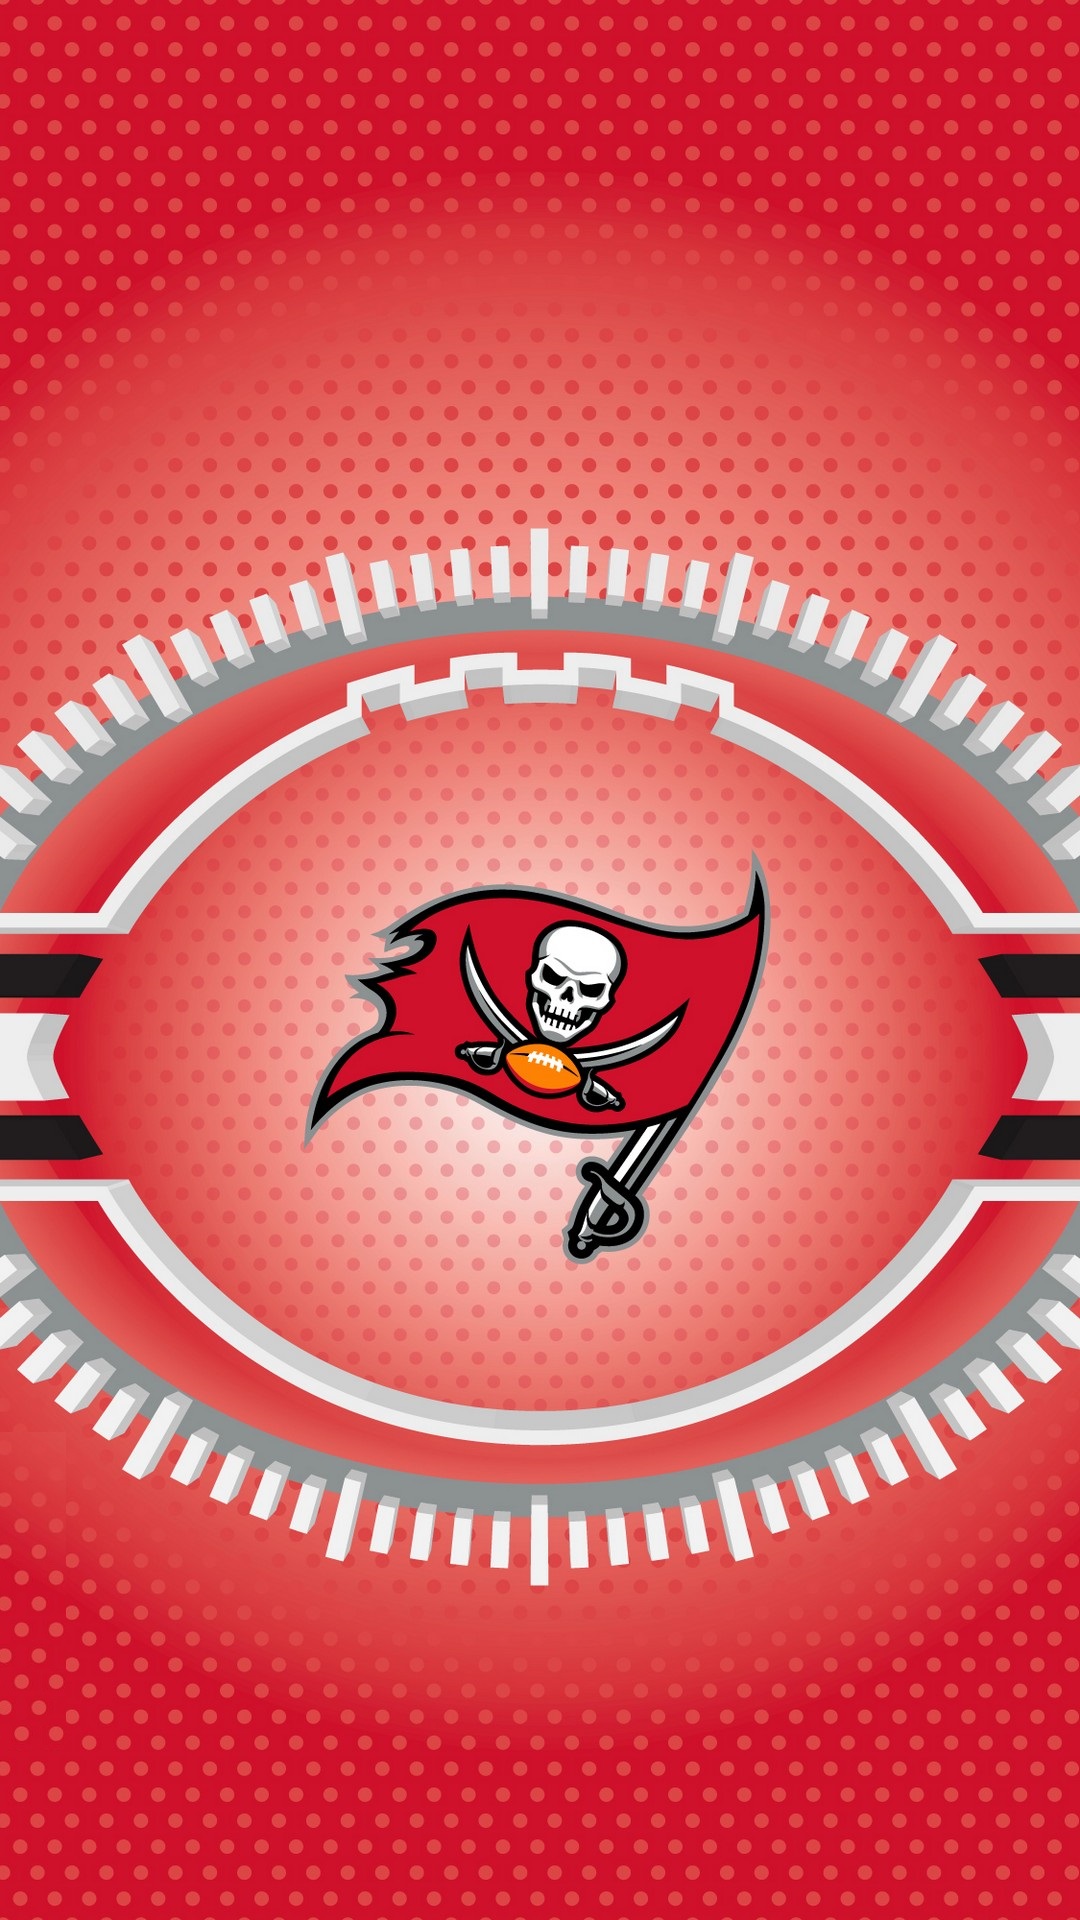 Buccaneers iPhone Wallpaper Size With high-resolution 1080X1920 pixel. Donwload and set as wallpaper for your iPhone X, iPhone XS home screen backgrounds, XS Max, XR, iPhone8 lock screen wallpaper, iPhone 7, 6, SE, and other mobile devices